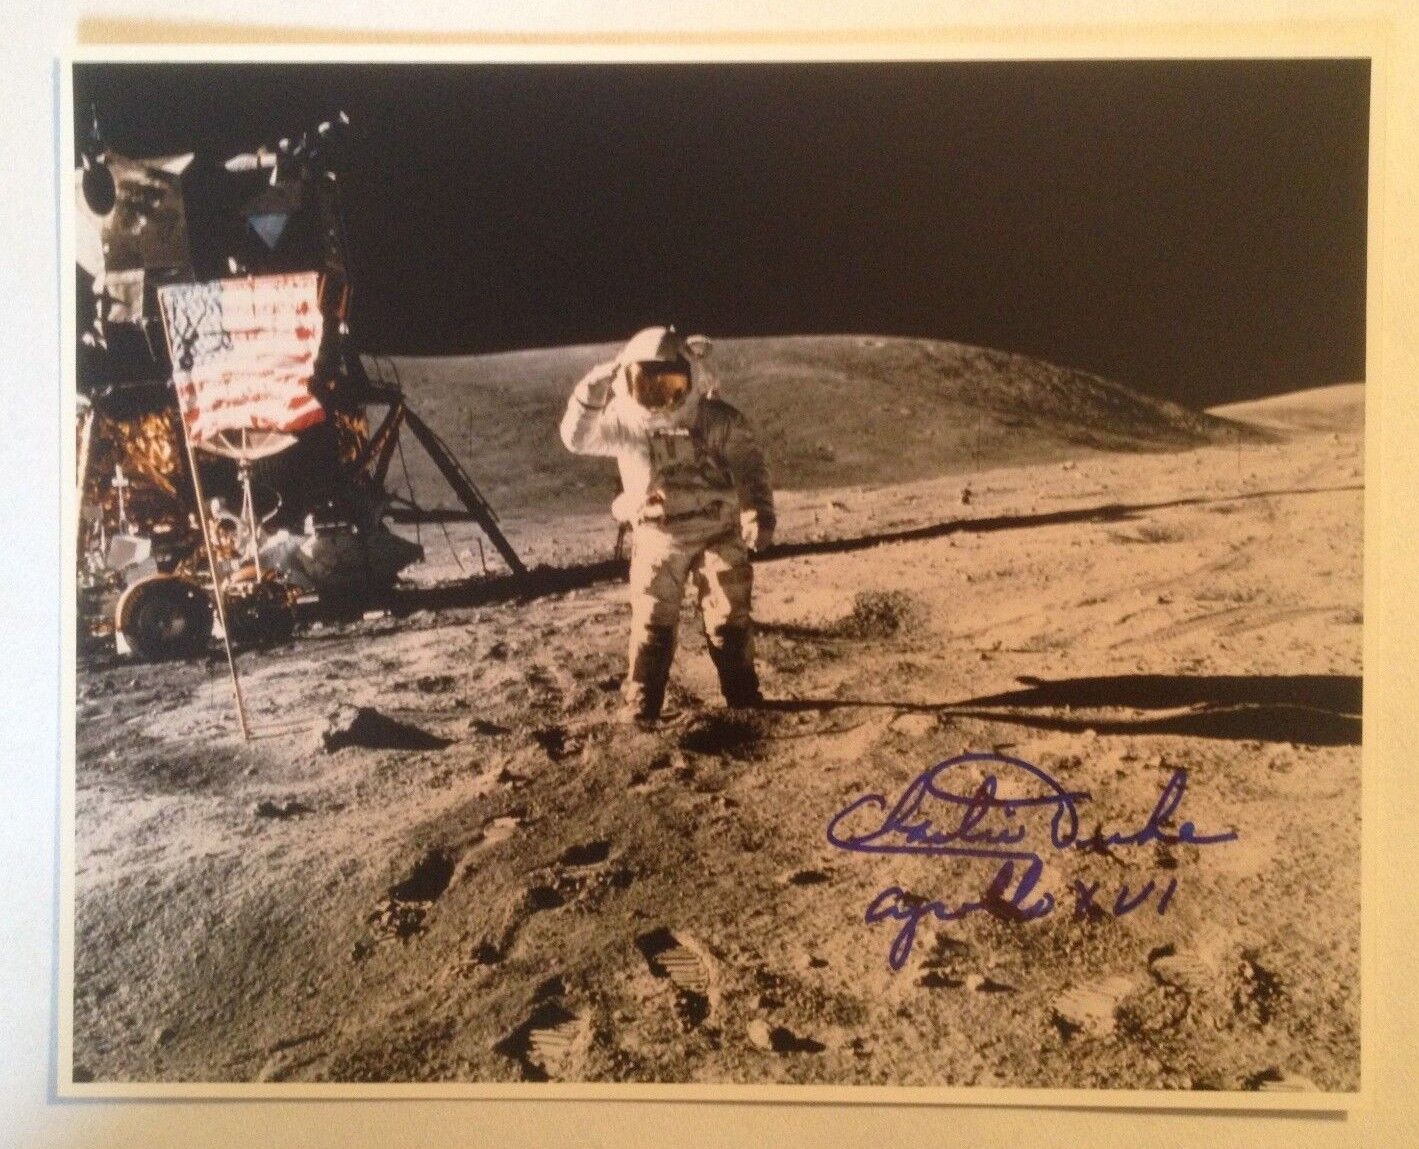 Astronaut Charles Duke Signed Photograph on the Moon with Flag (Apollo 16)